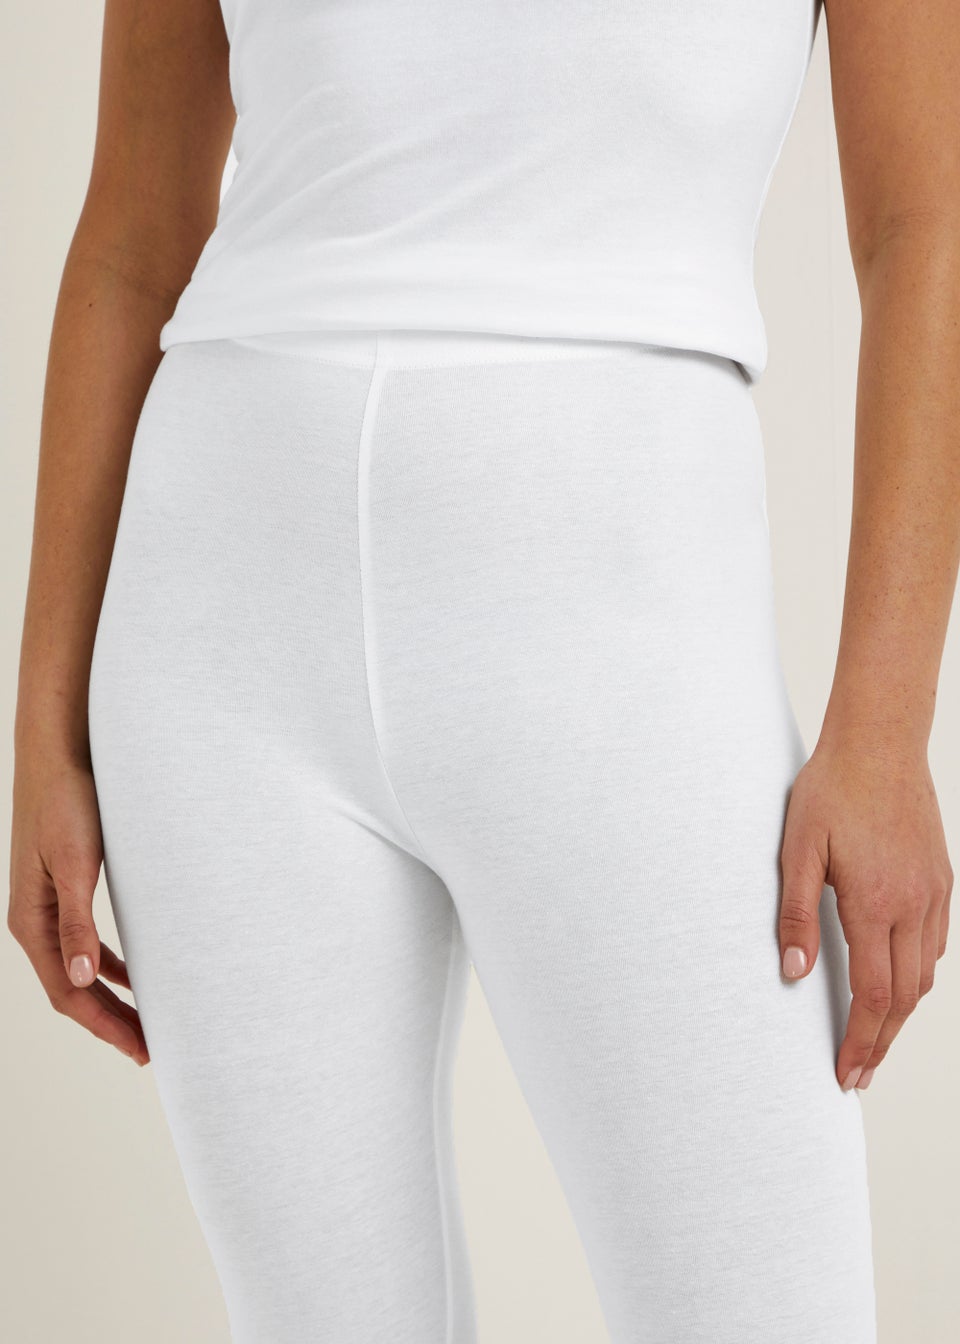 Women white jeggings Plus size compression pant 2 bk pockets - Belore Slims-sonthuy.vn